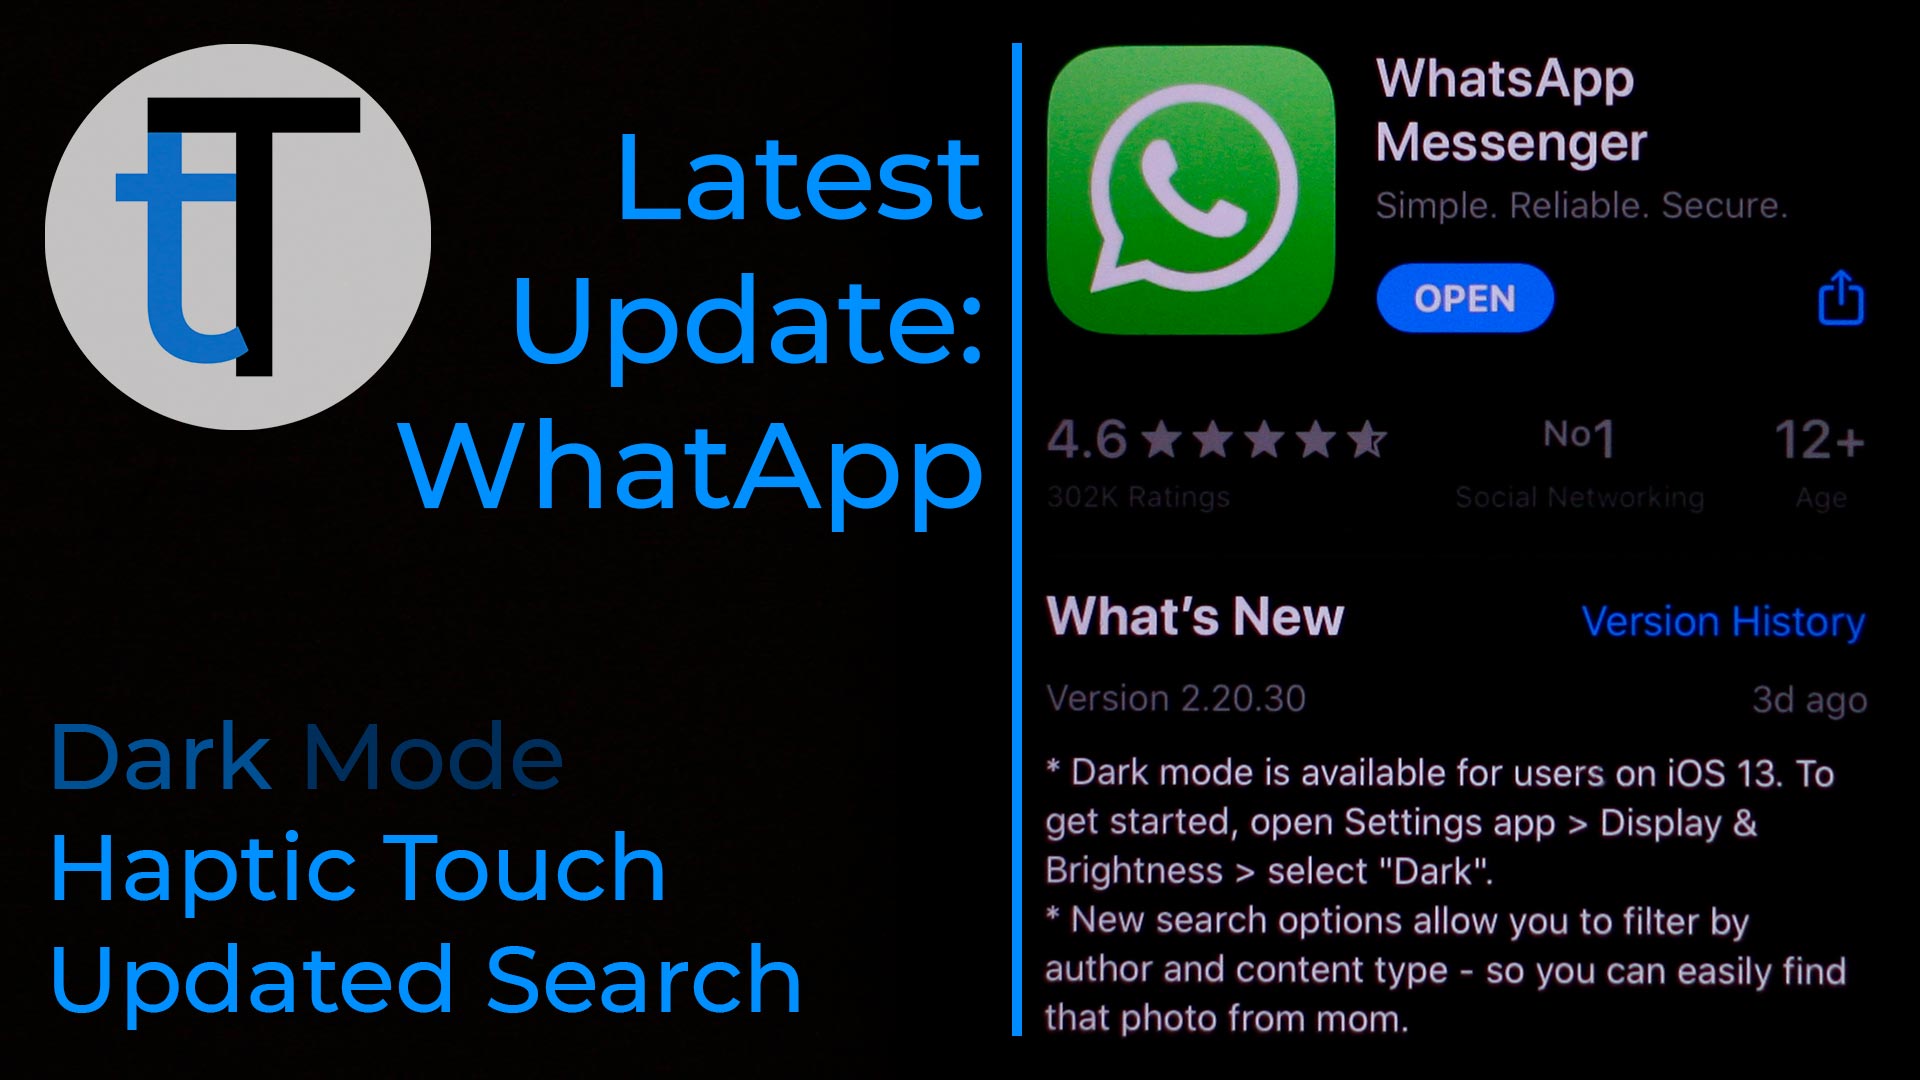 Screenshot of WhatsApp What is new section in App Store